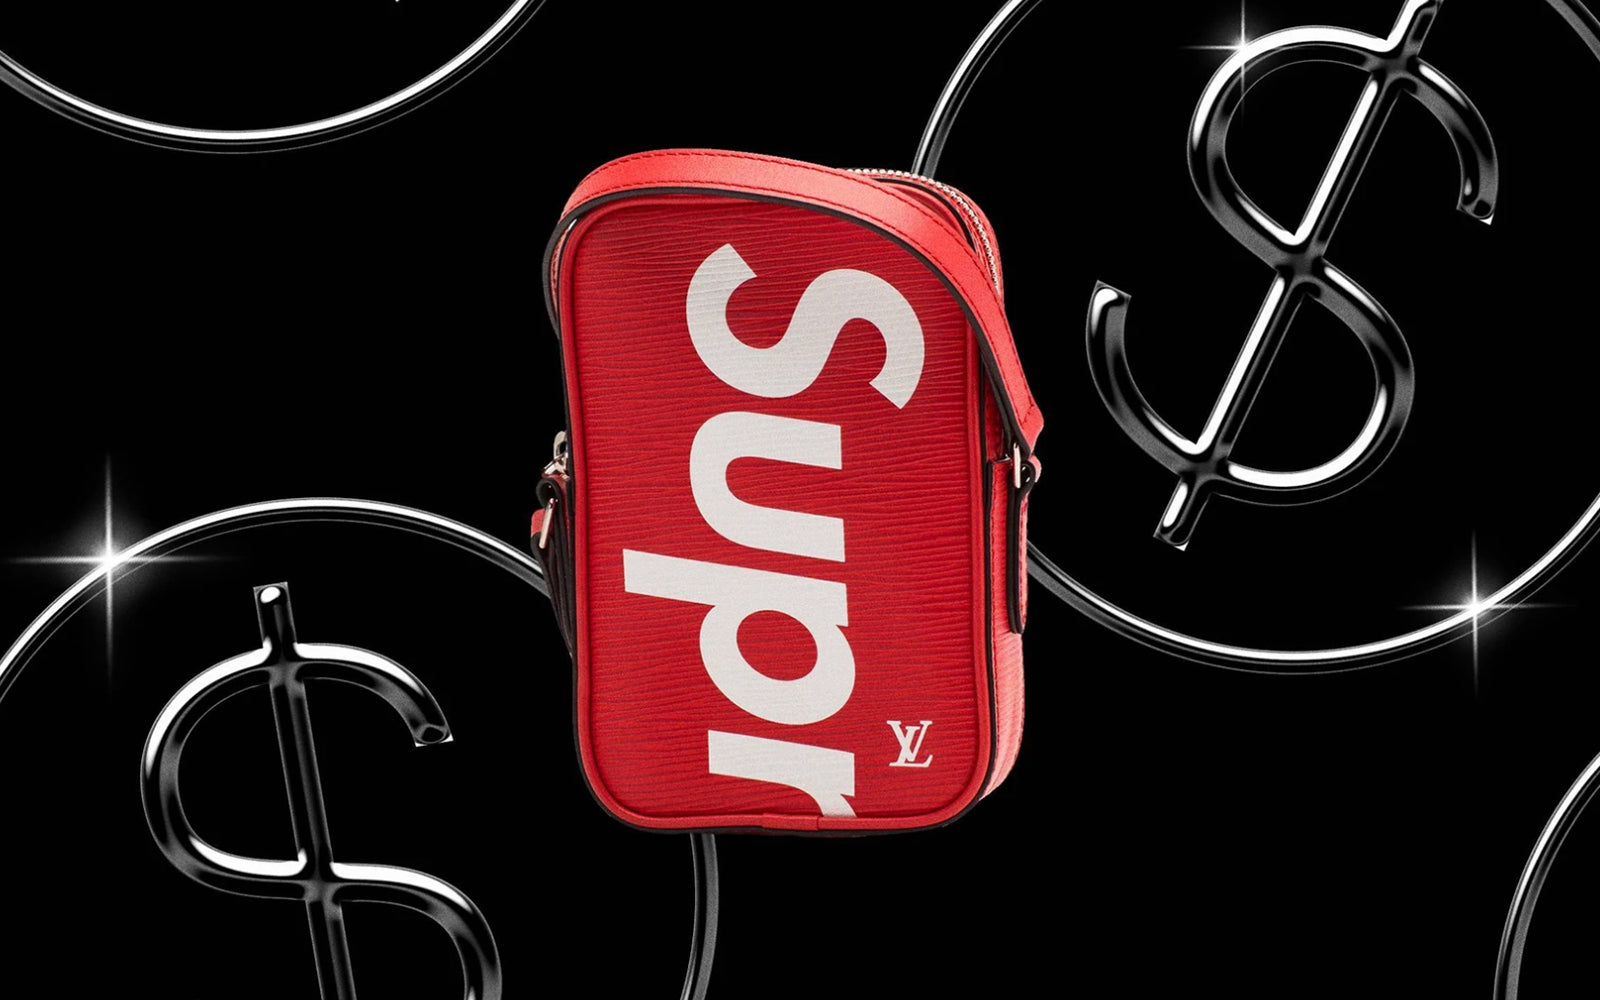 Louis Vuitton X Supreme: the mysterious end to the pop-ups